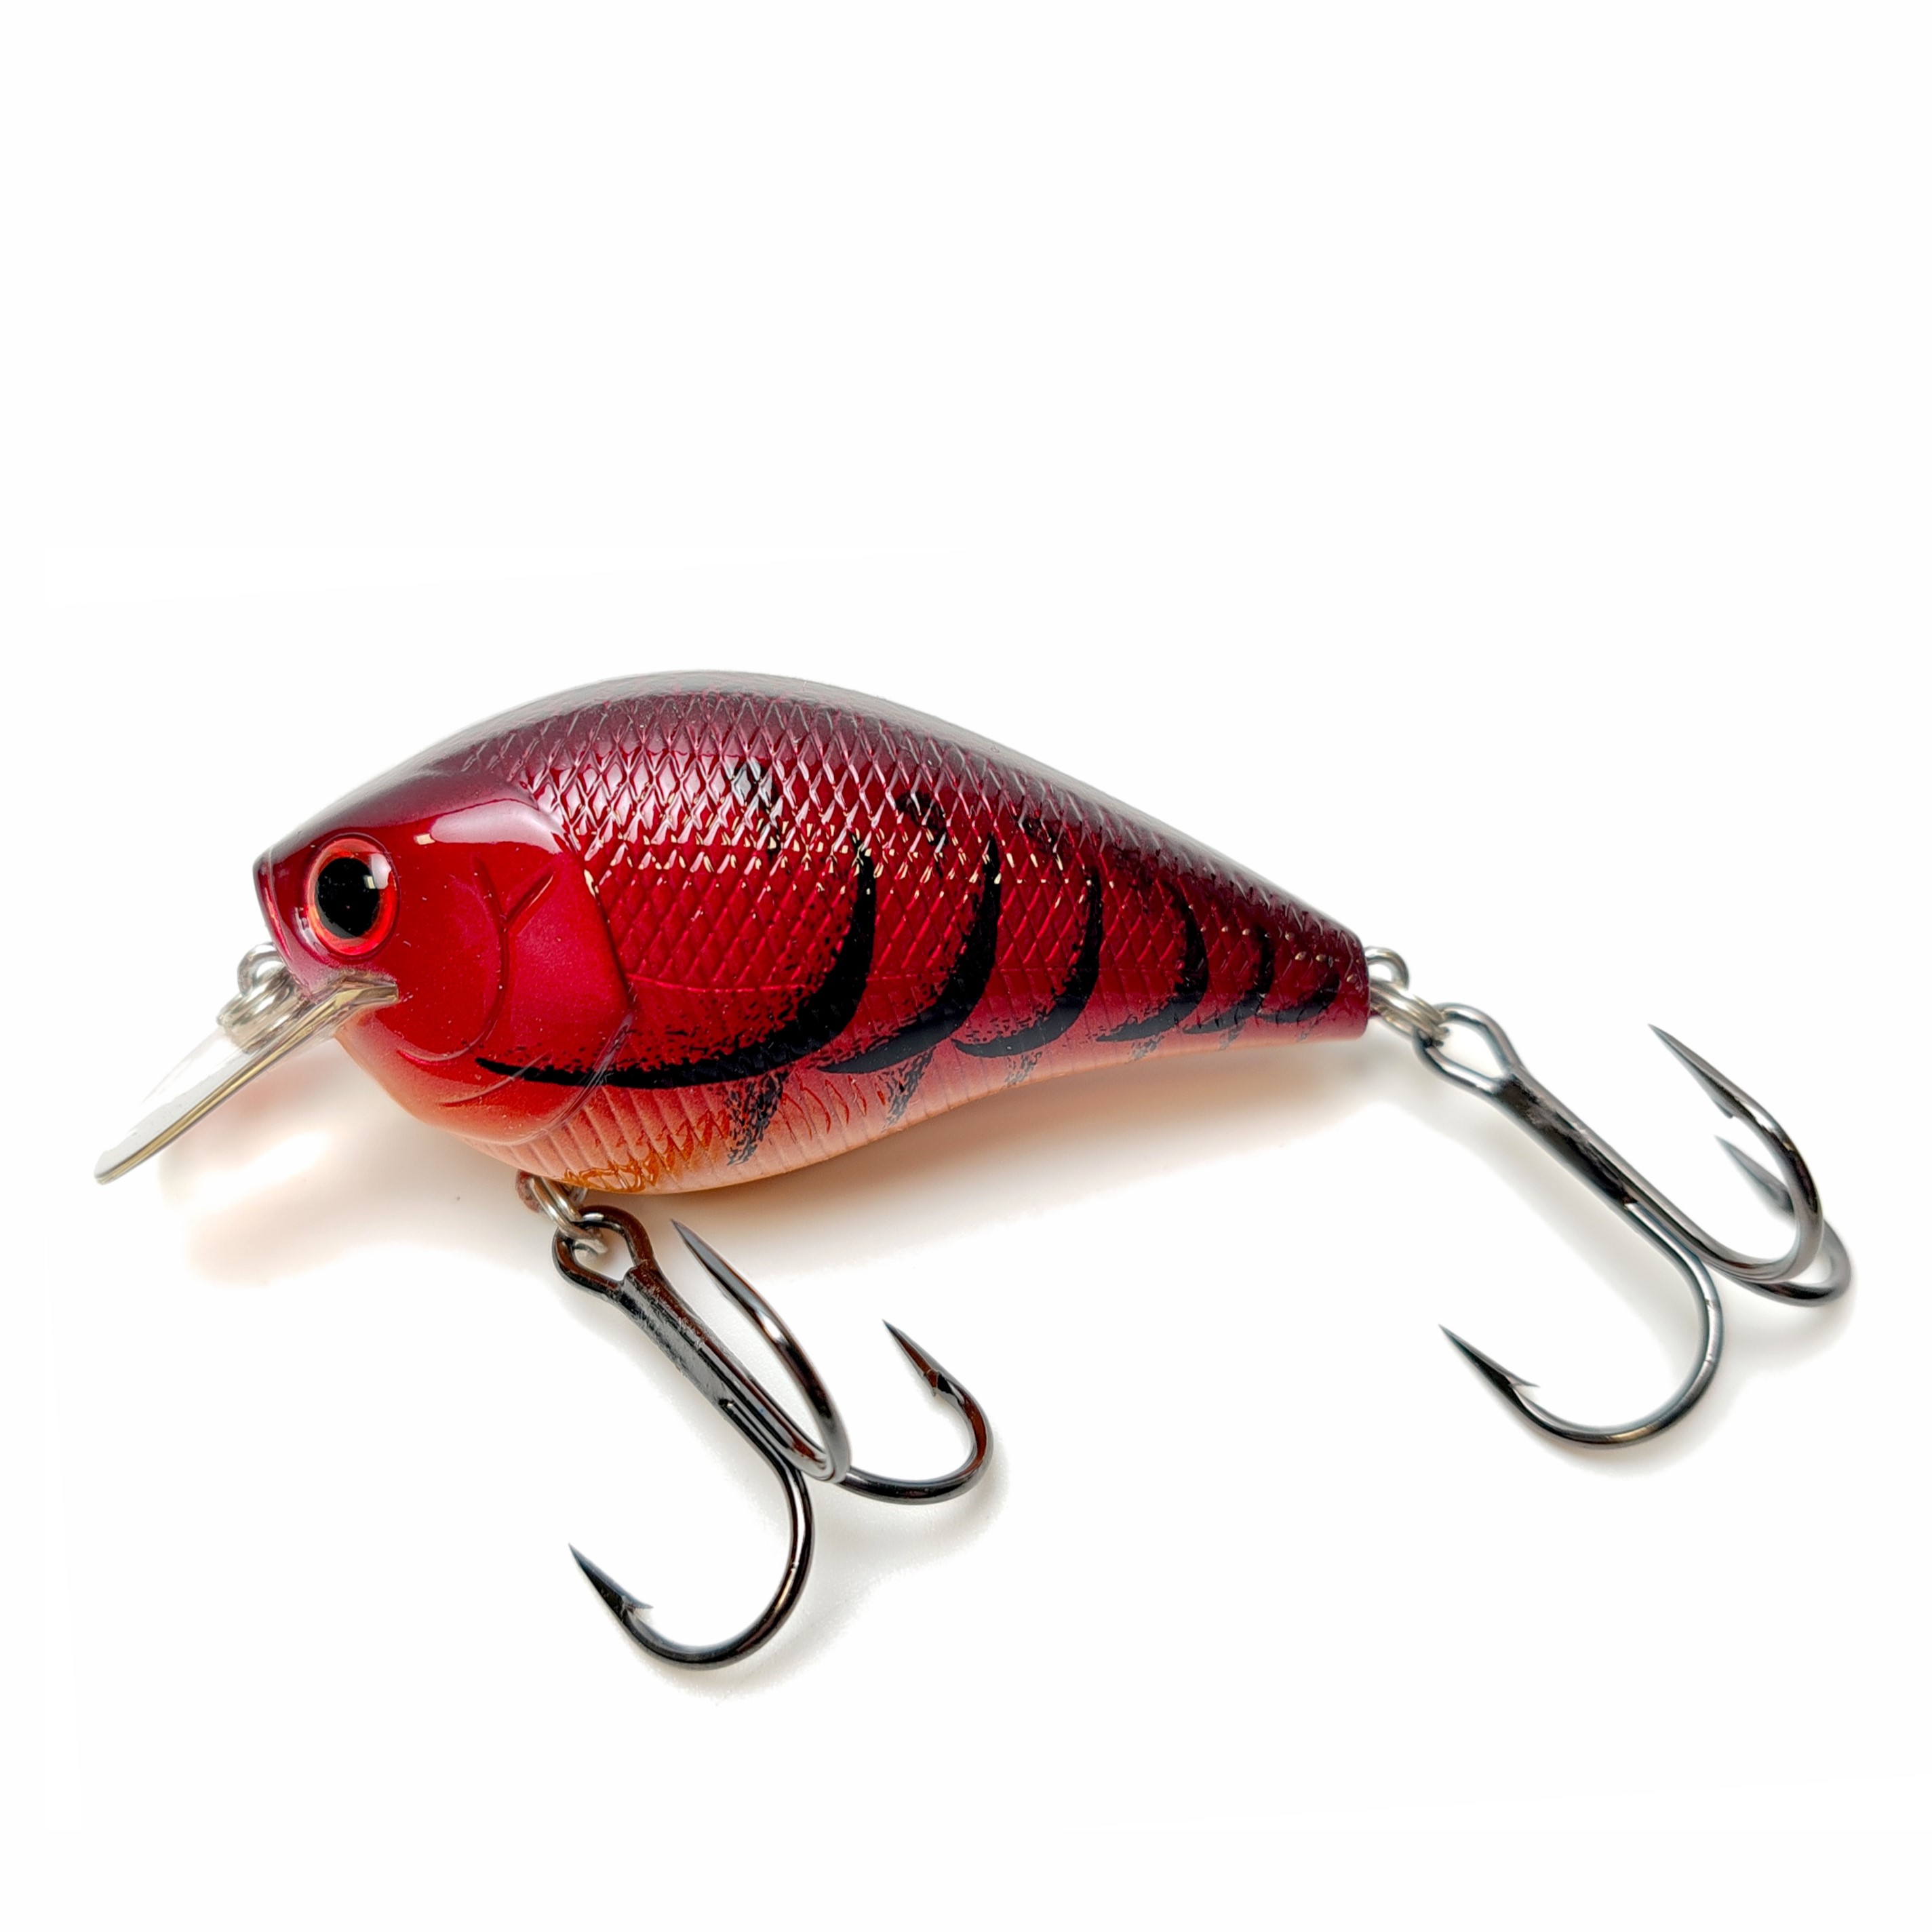 Square Bill Crankbait Lucky Craft Fat CB BDS 2 col. Spring Craw